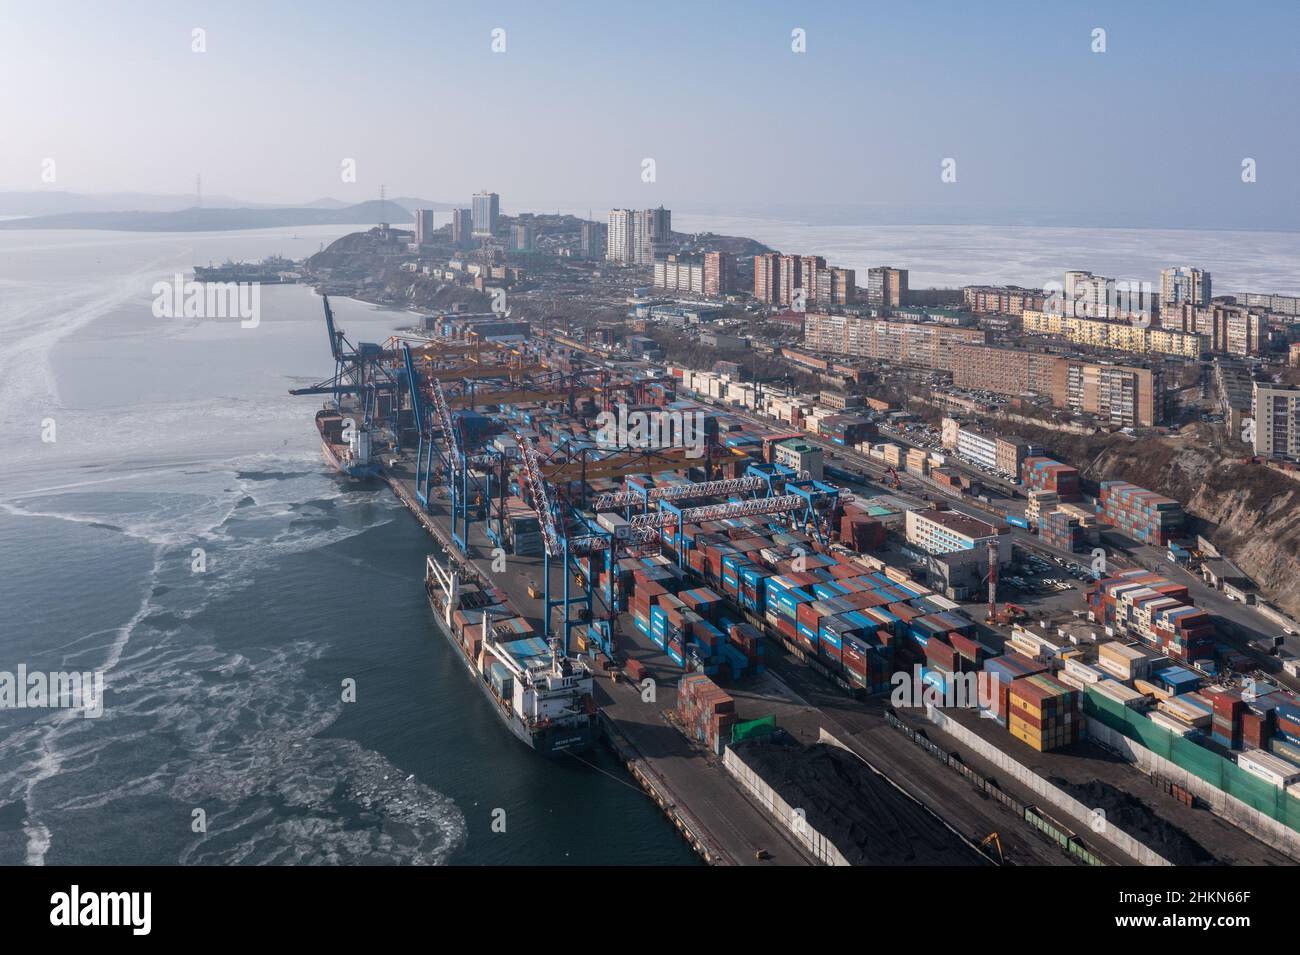 Vladivostok, Russia - January 27, 2022:A top view of the seaport container terminal and city. Winter, a container ship is loading at the berth. Stock Photo